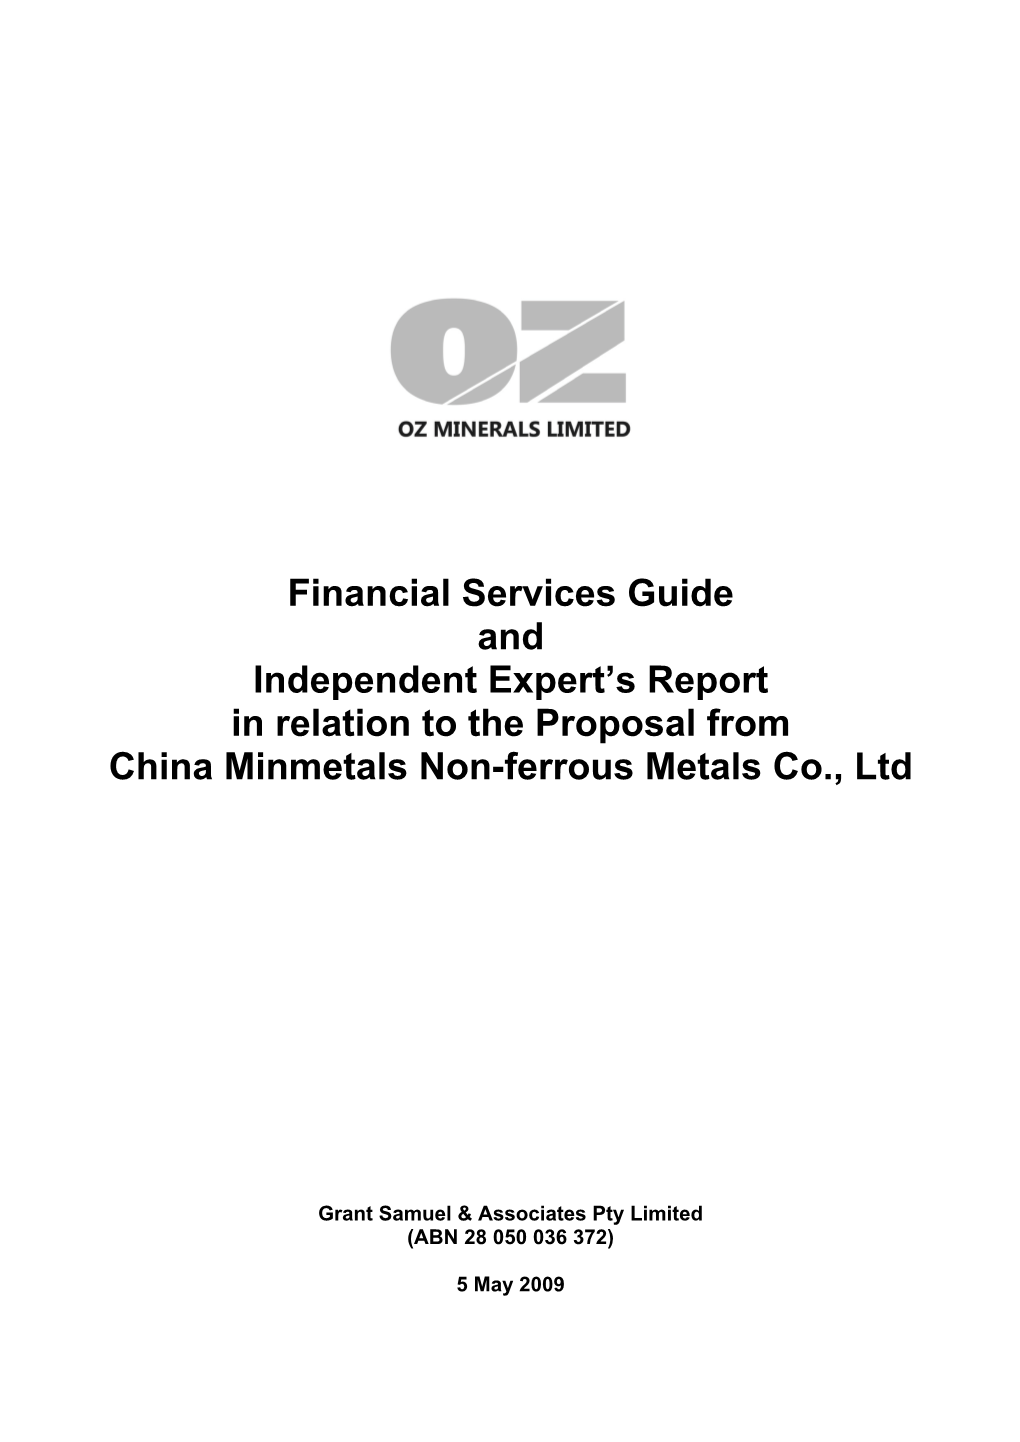 Financial Services Guide and Independent Expert's Report In